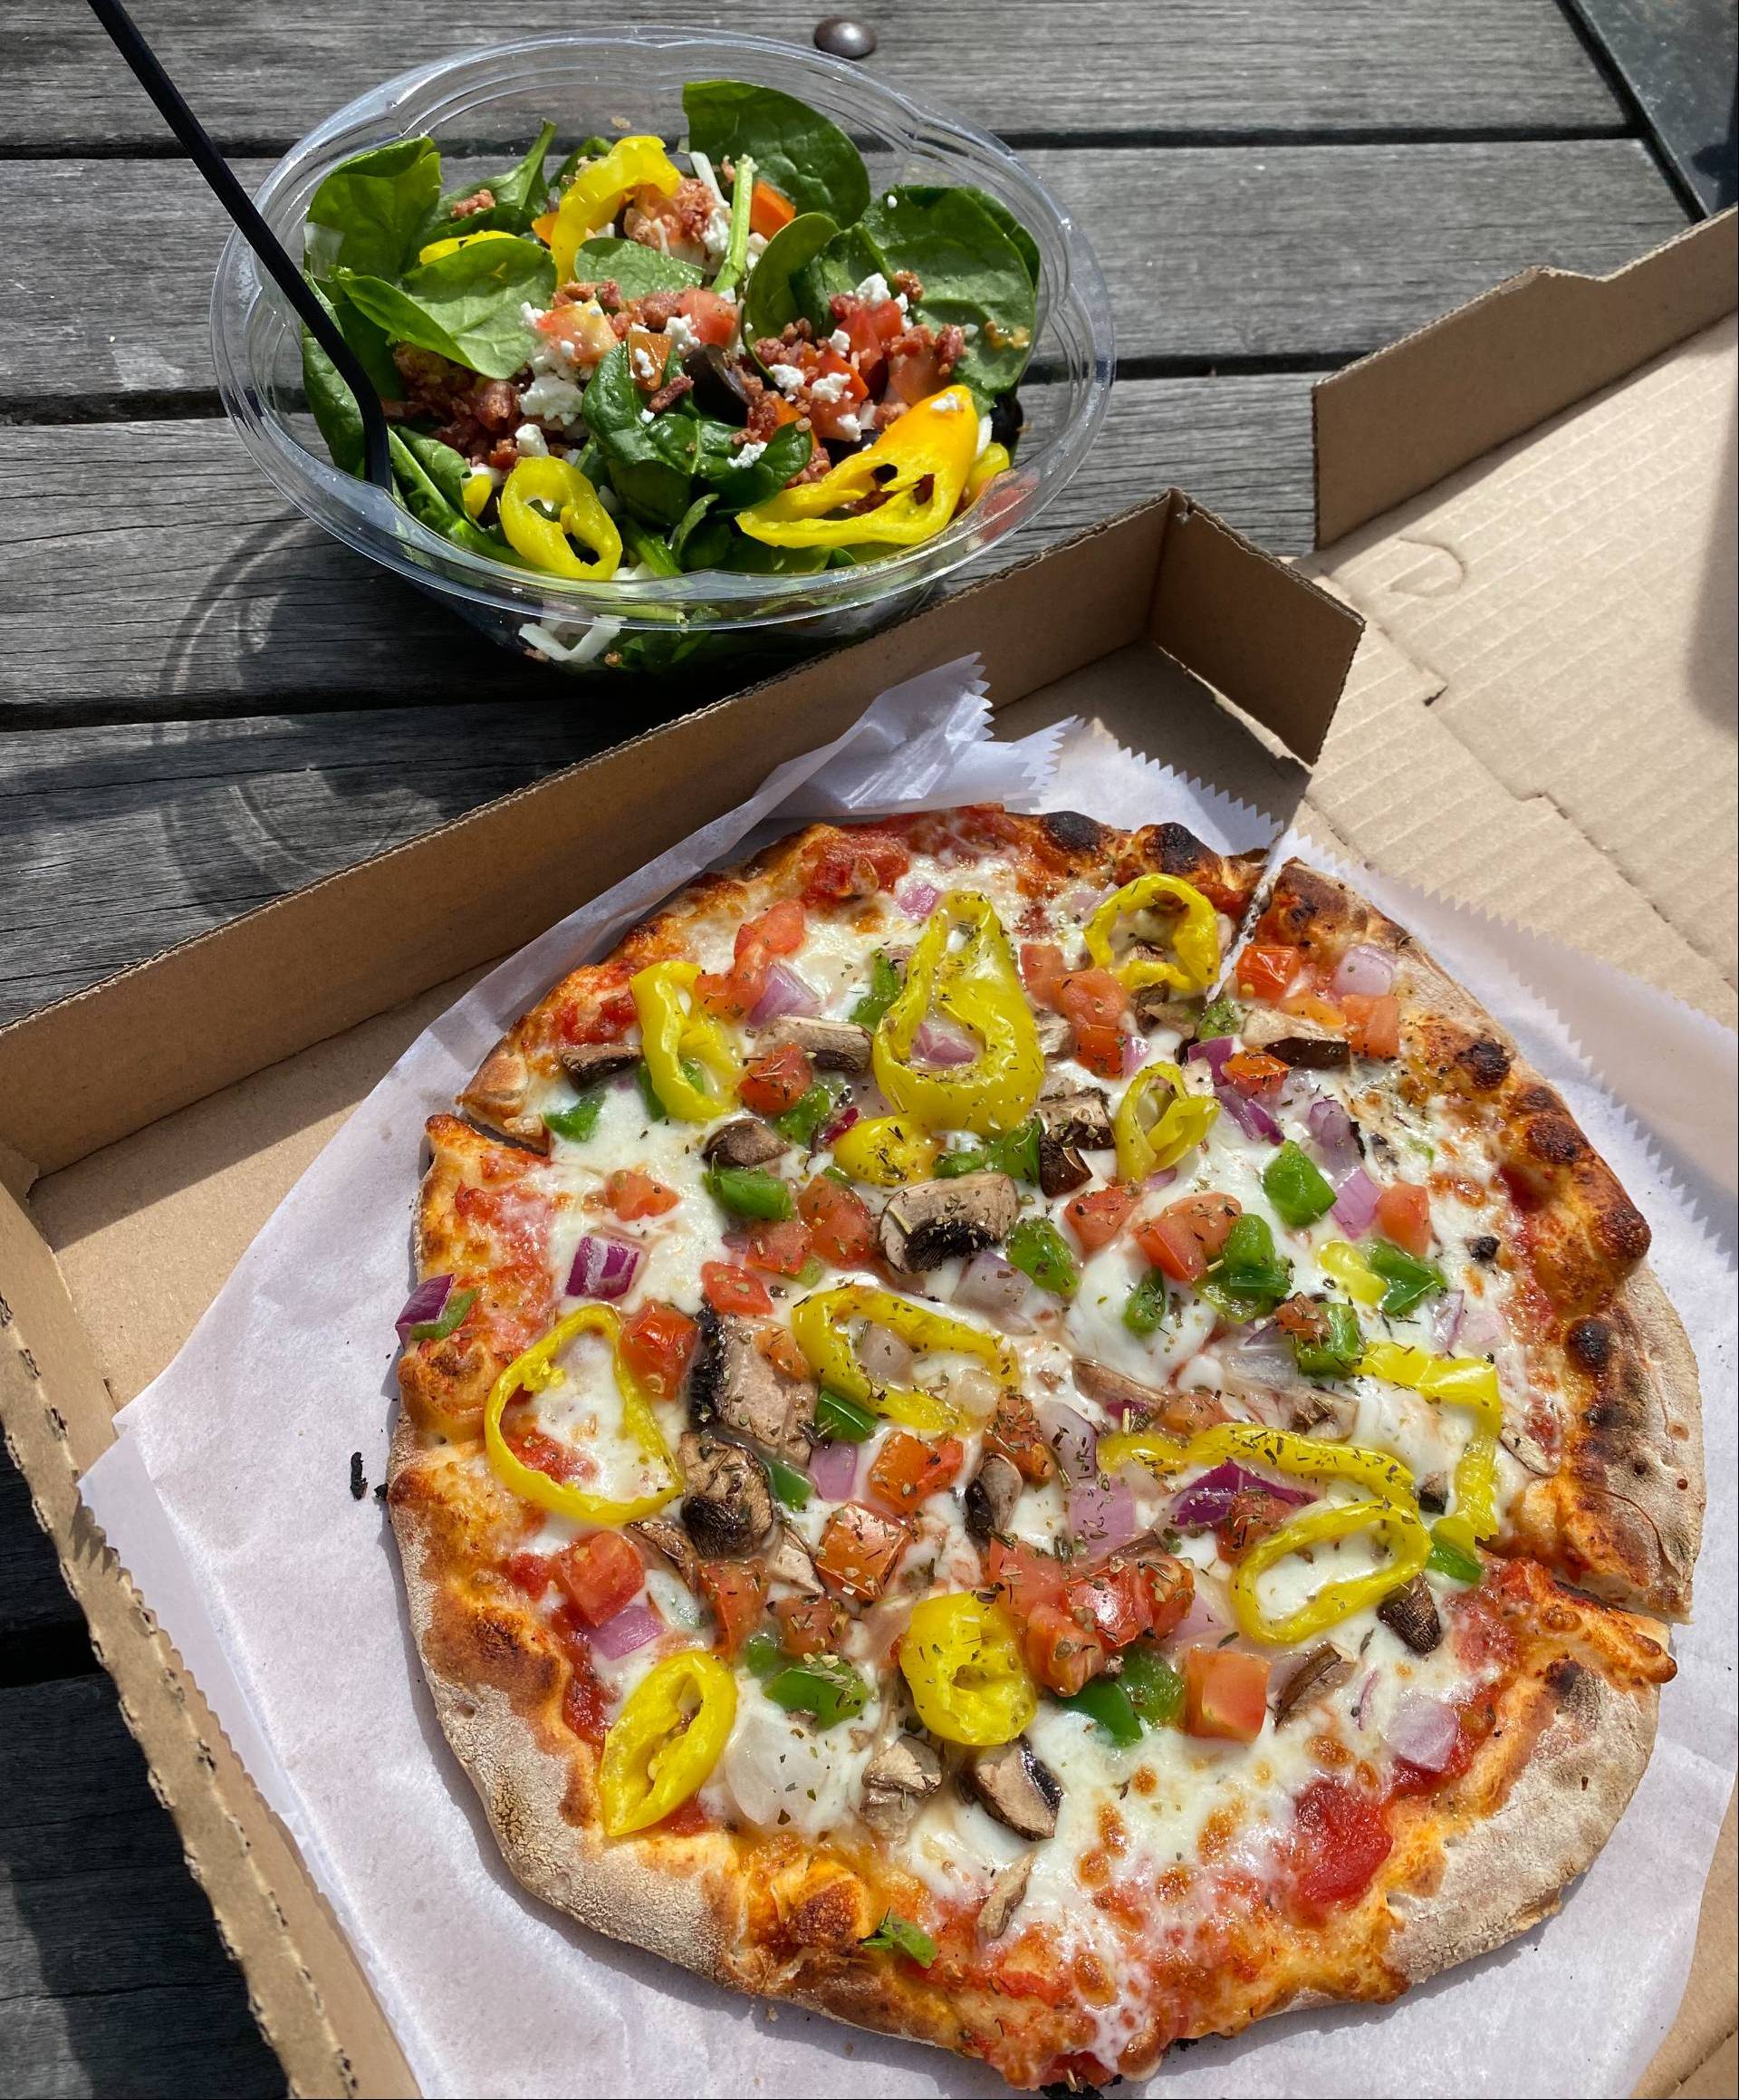 A photograph of a pizza in a box sitting on a picnic table with a side salad sitting in a bowl beside it.